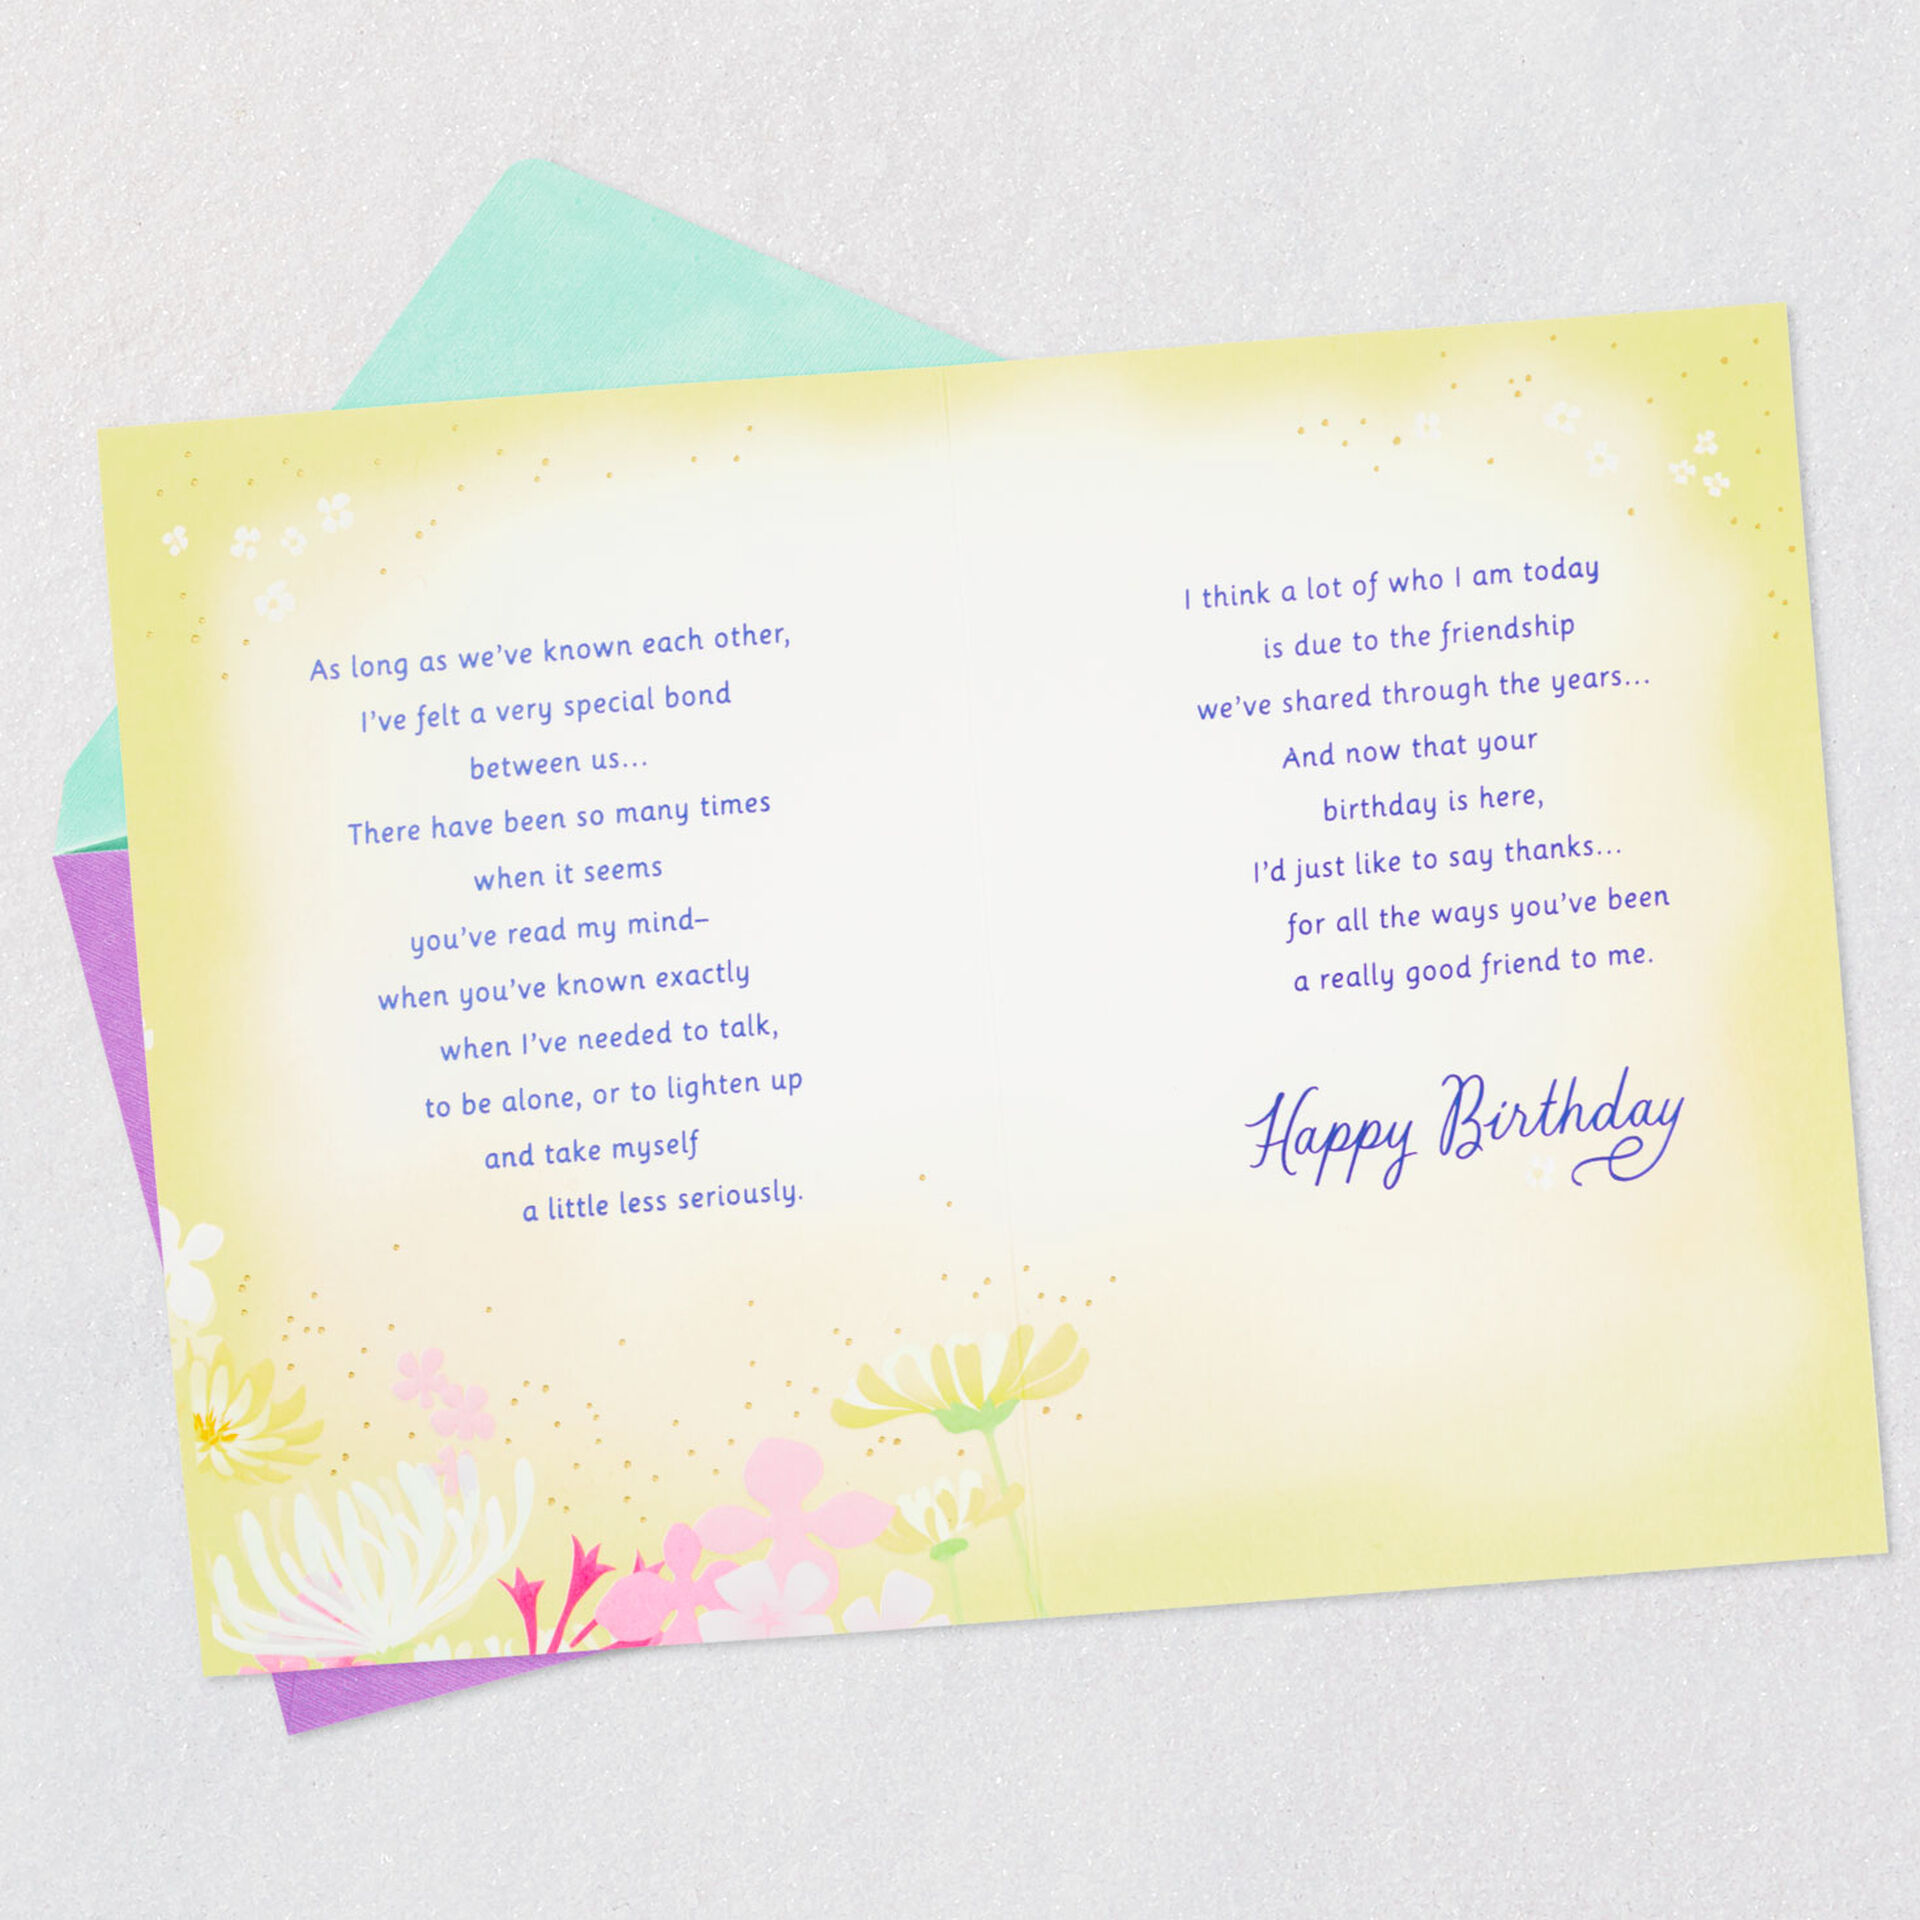 Butterflies-and-Flowers-Birthday-Card-for-Friend_559HBD3982_04